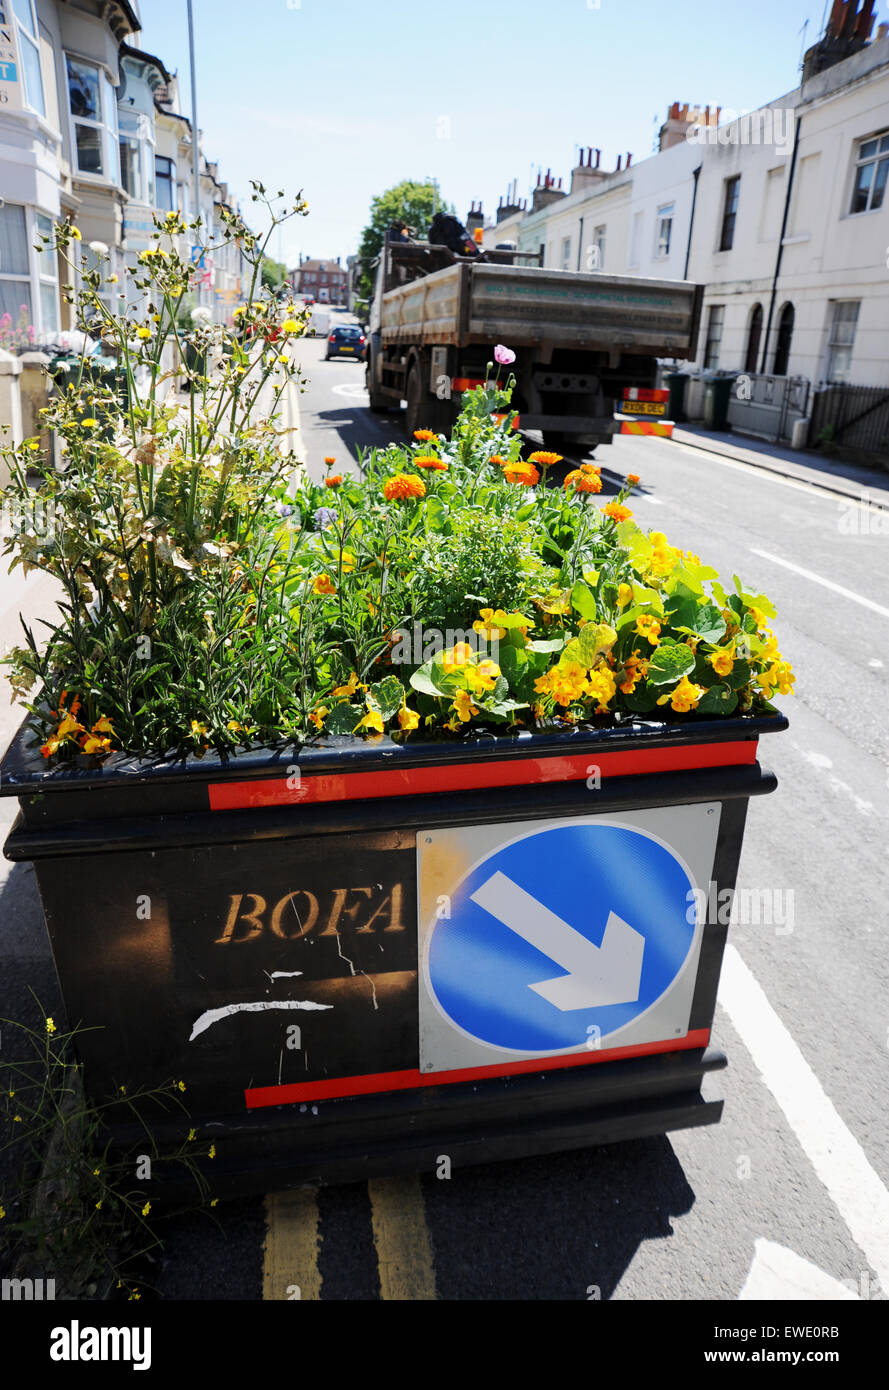 Brighton, UK. 24th June, 2015. The controversial traffic calming plant pots in Viaduct Road Brighton are now bursting into life with wild flowers including poppies coming into flower The four planters caused a major stir when they were introduced by the city council back in February and were branded as dangerous by both drivers and local residents Stock Photo